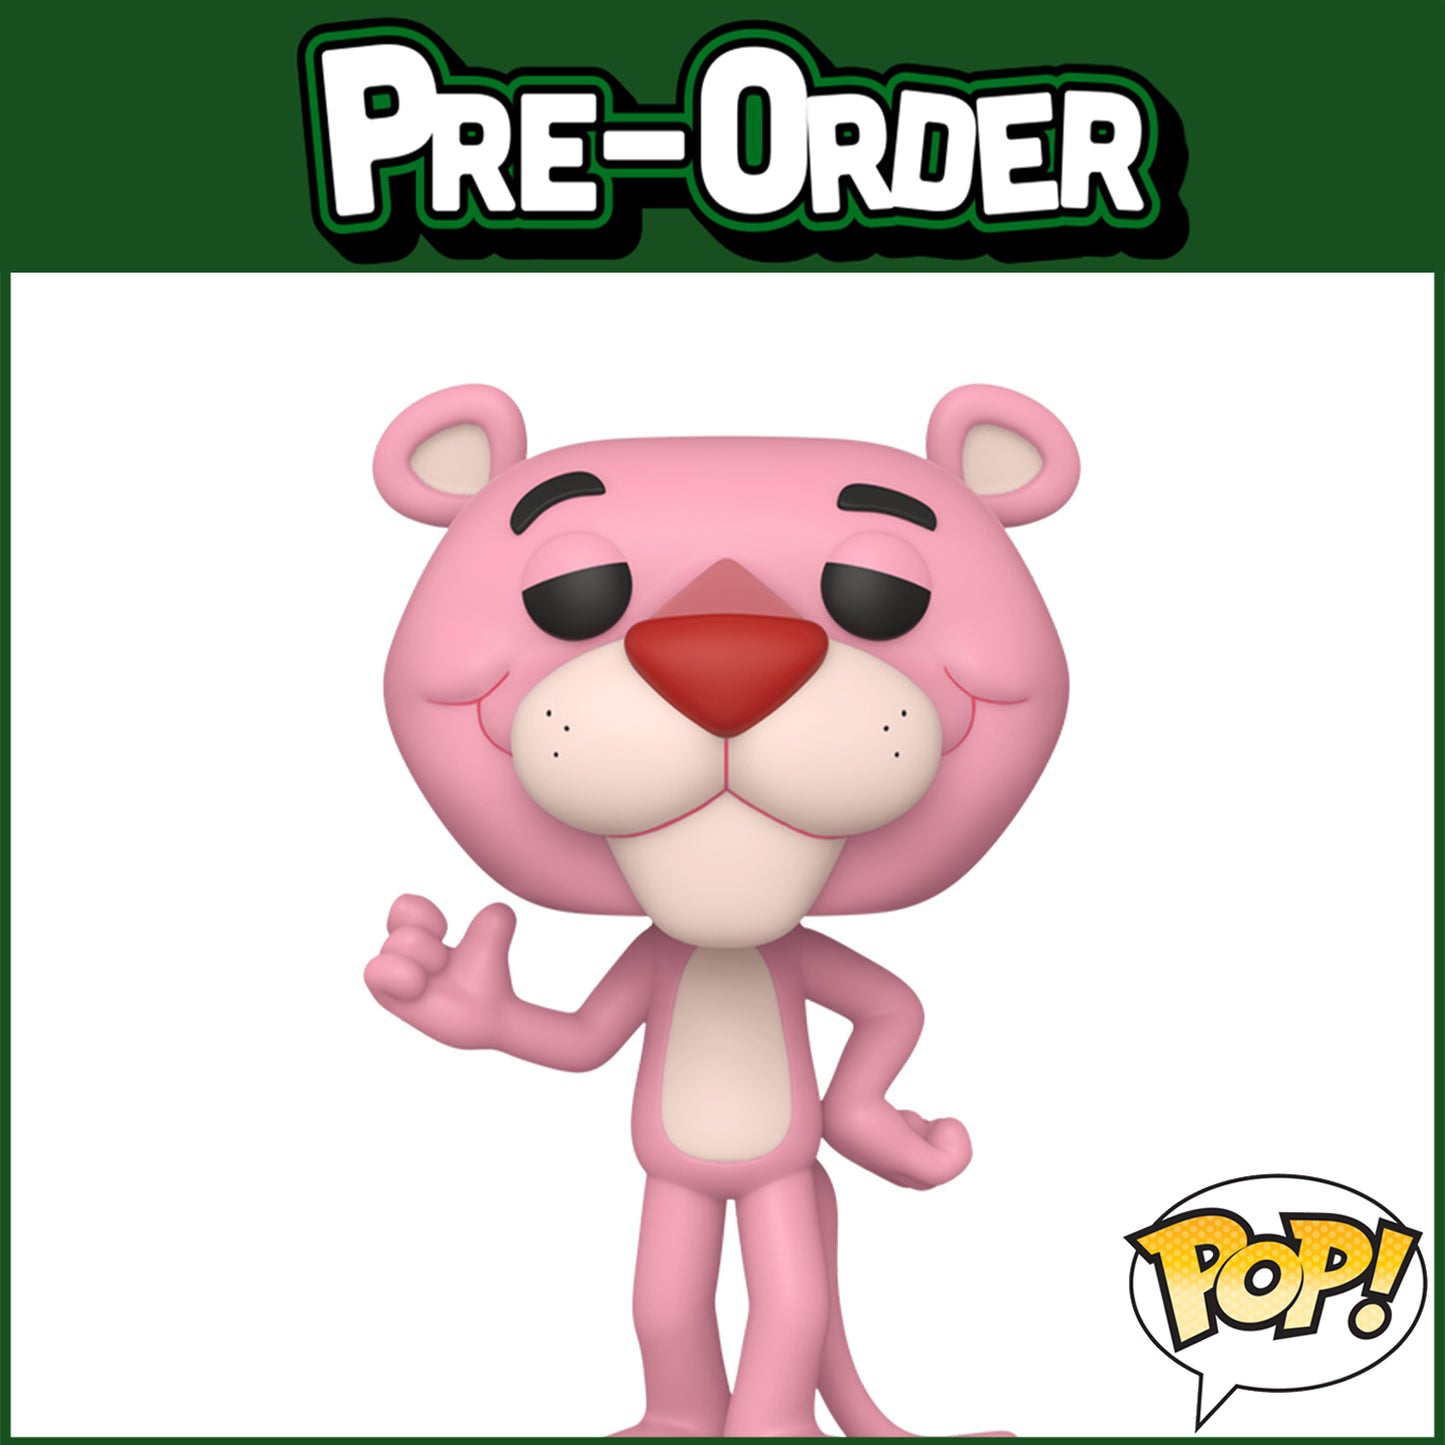 (PRE-ORDER) Funko POP! Television: Pink Panther #1551